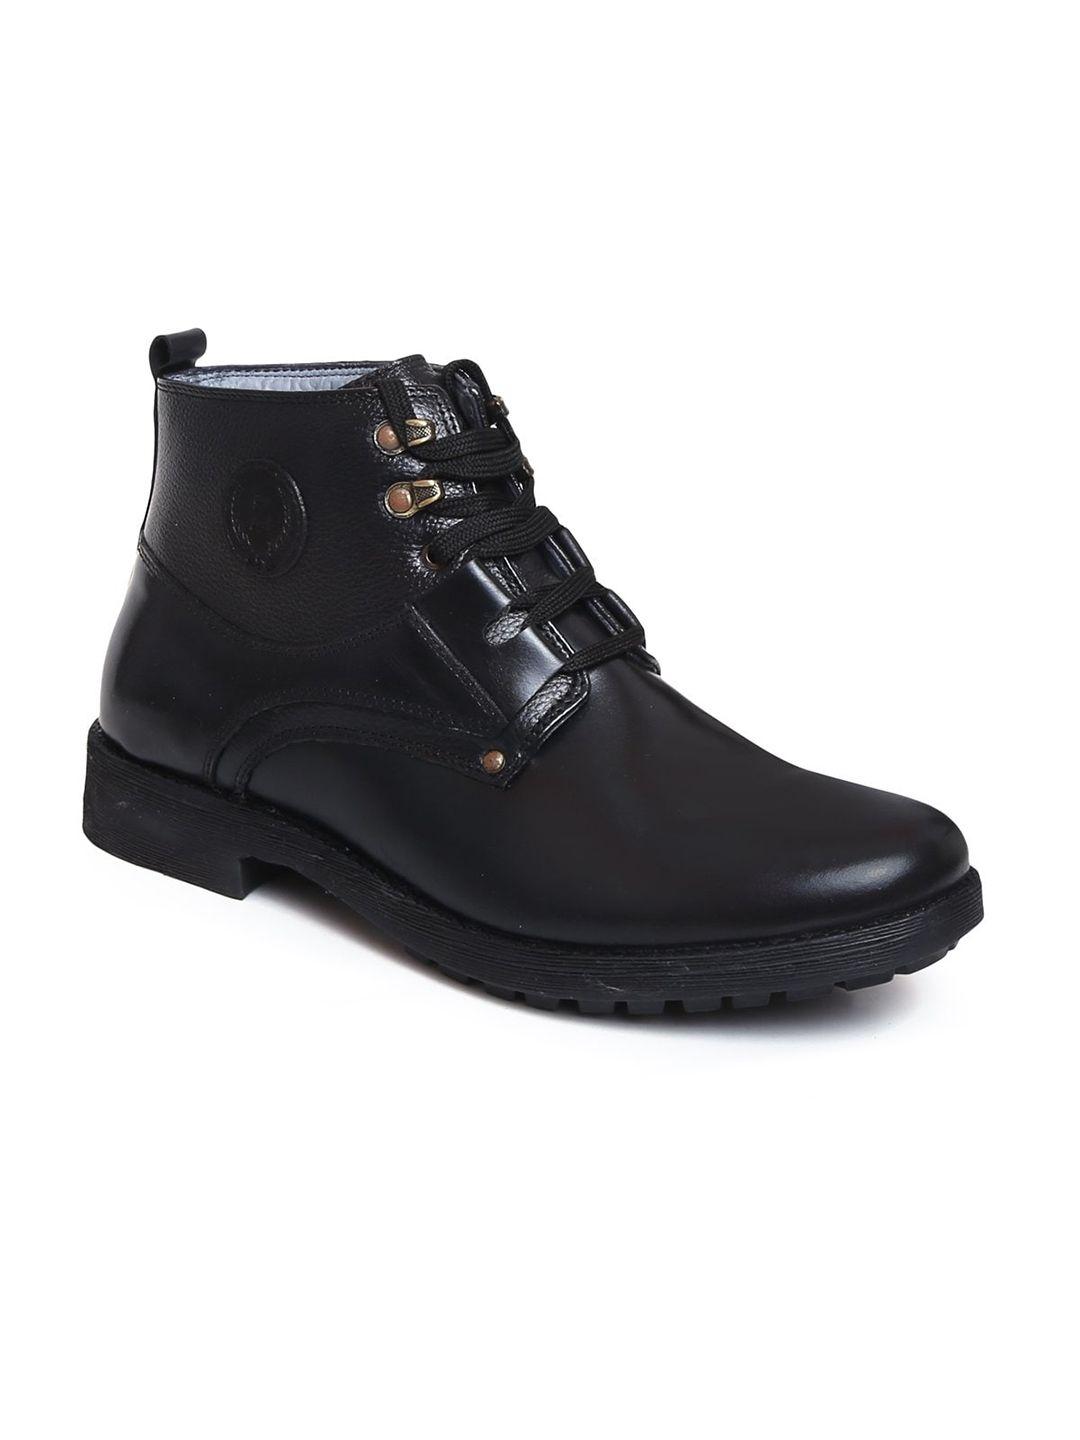 zoom shoes men black solid leather boots